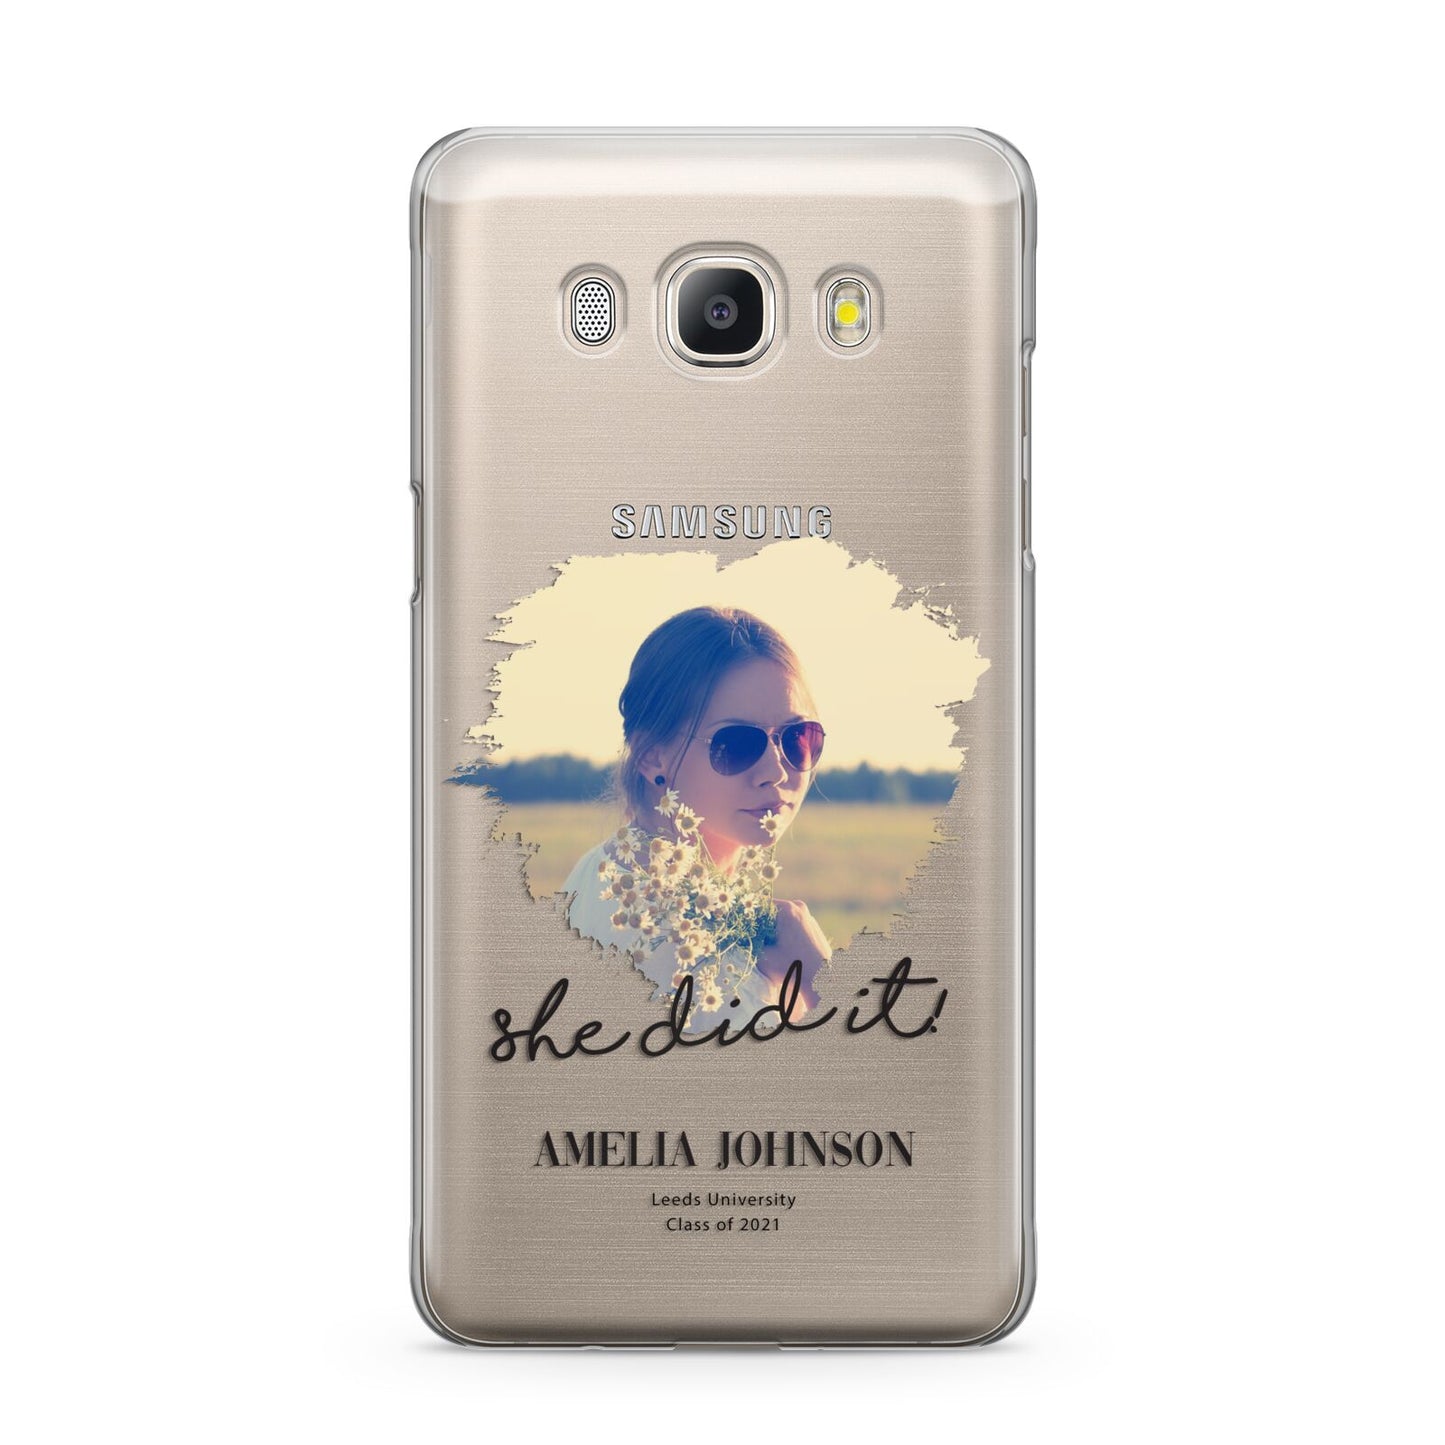 She Did It Graduation Photo with Name Samsung Galaxy J5 2016 Case